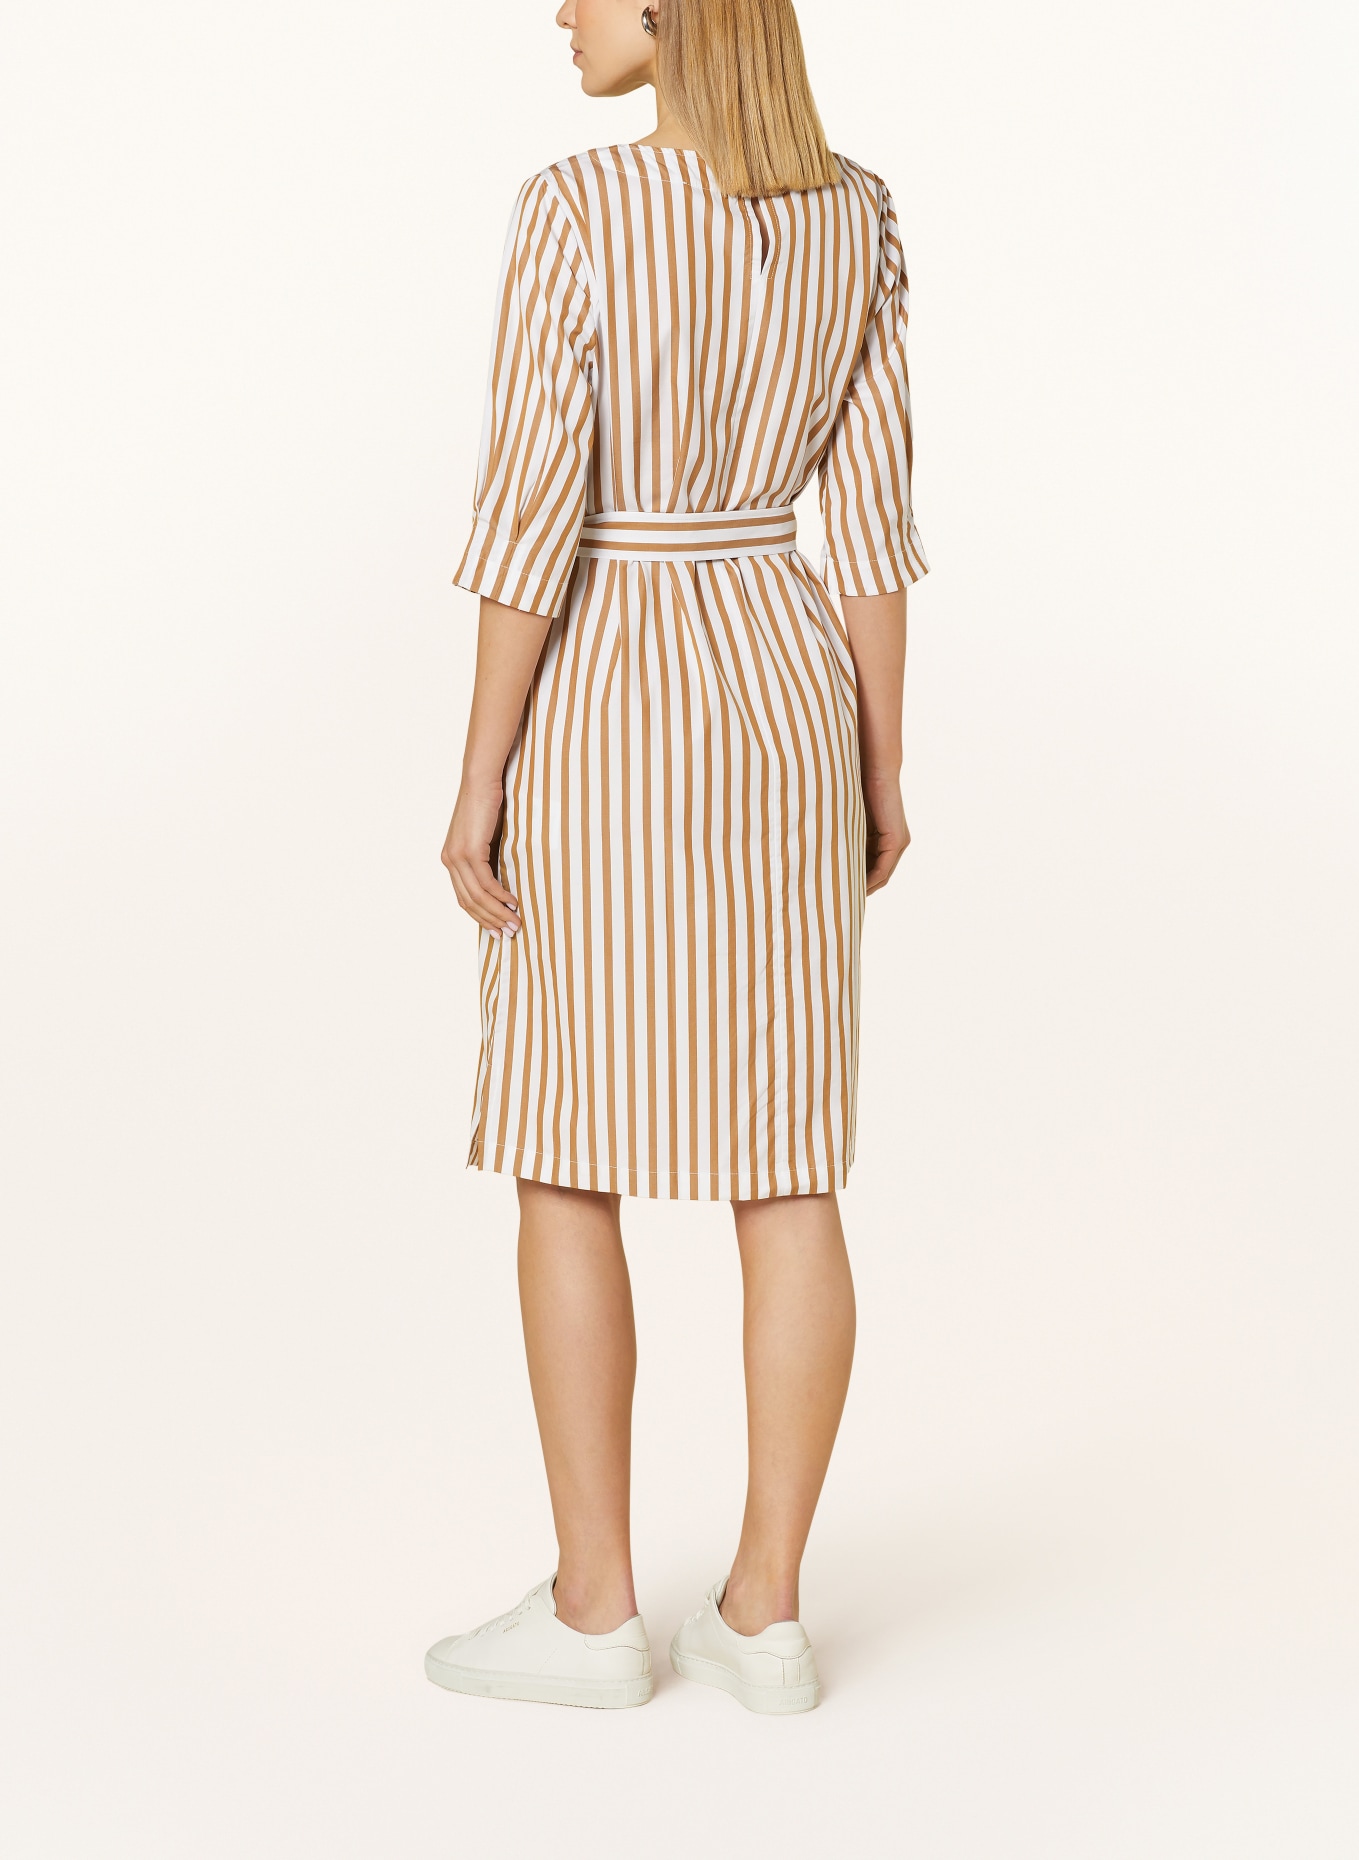 MAERZ MUENCHEN Dress with 3/4 sleeves, Color: COGNAC/ WHITE (Image 3)